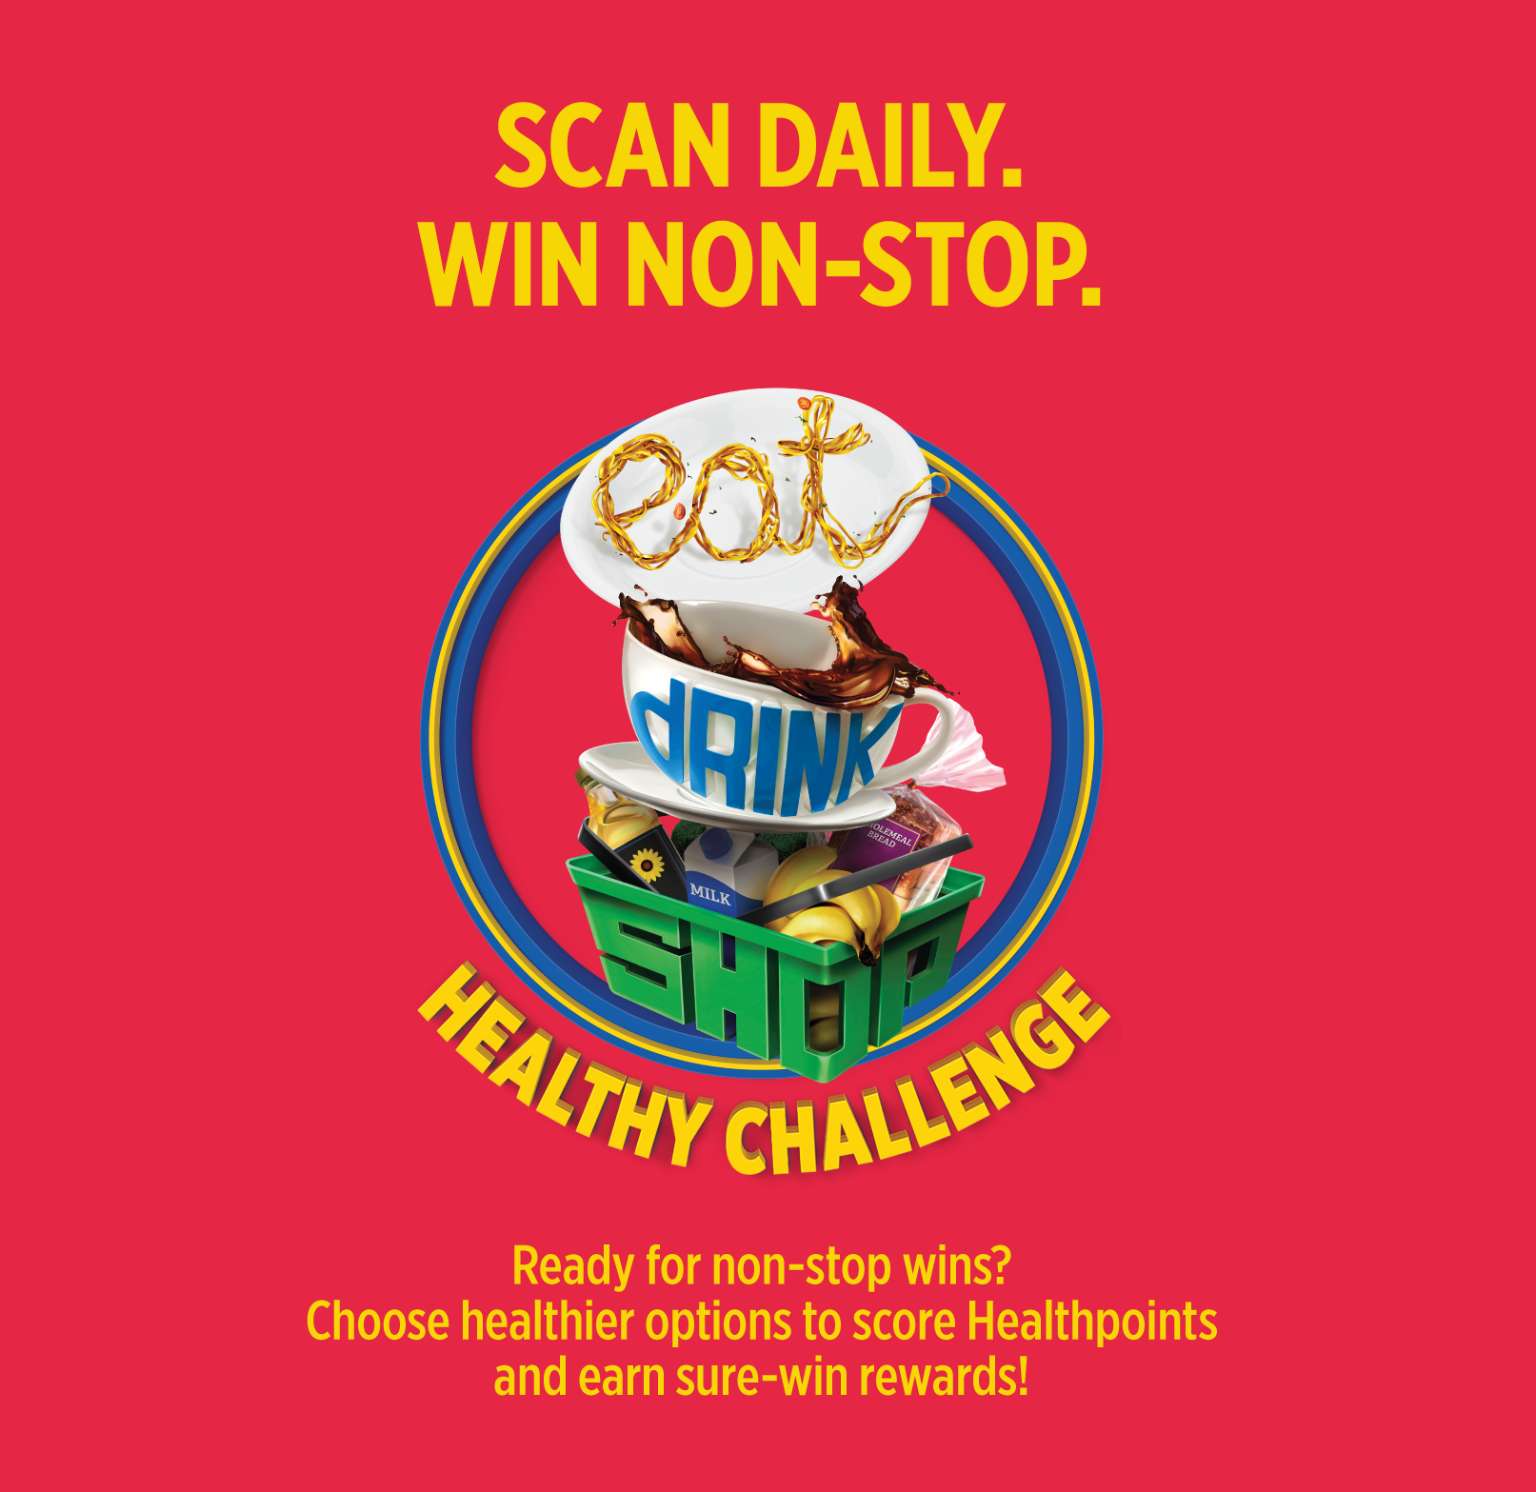 SCAN DAILY. WIN NON-STOP.